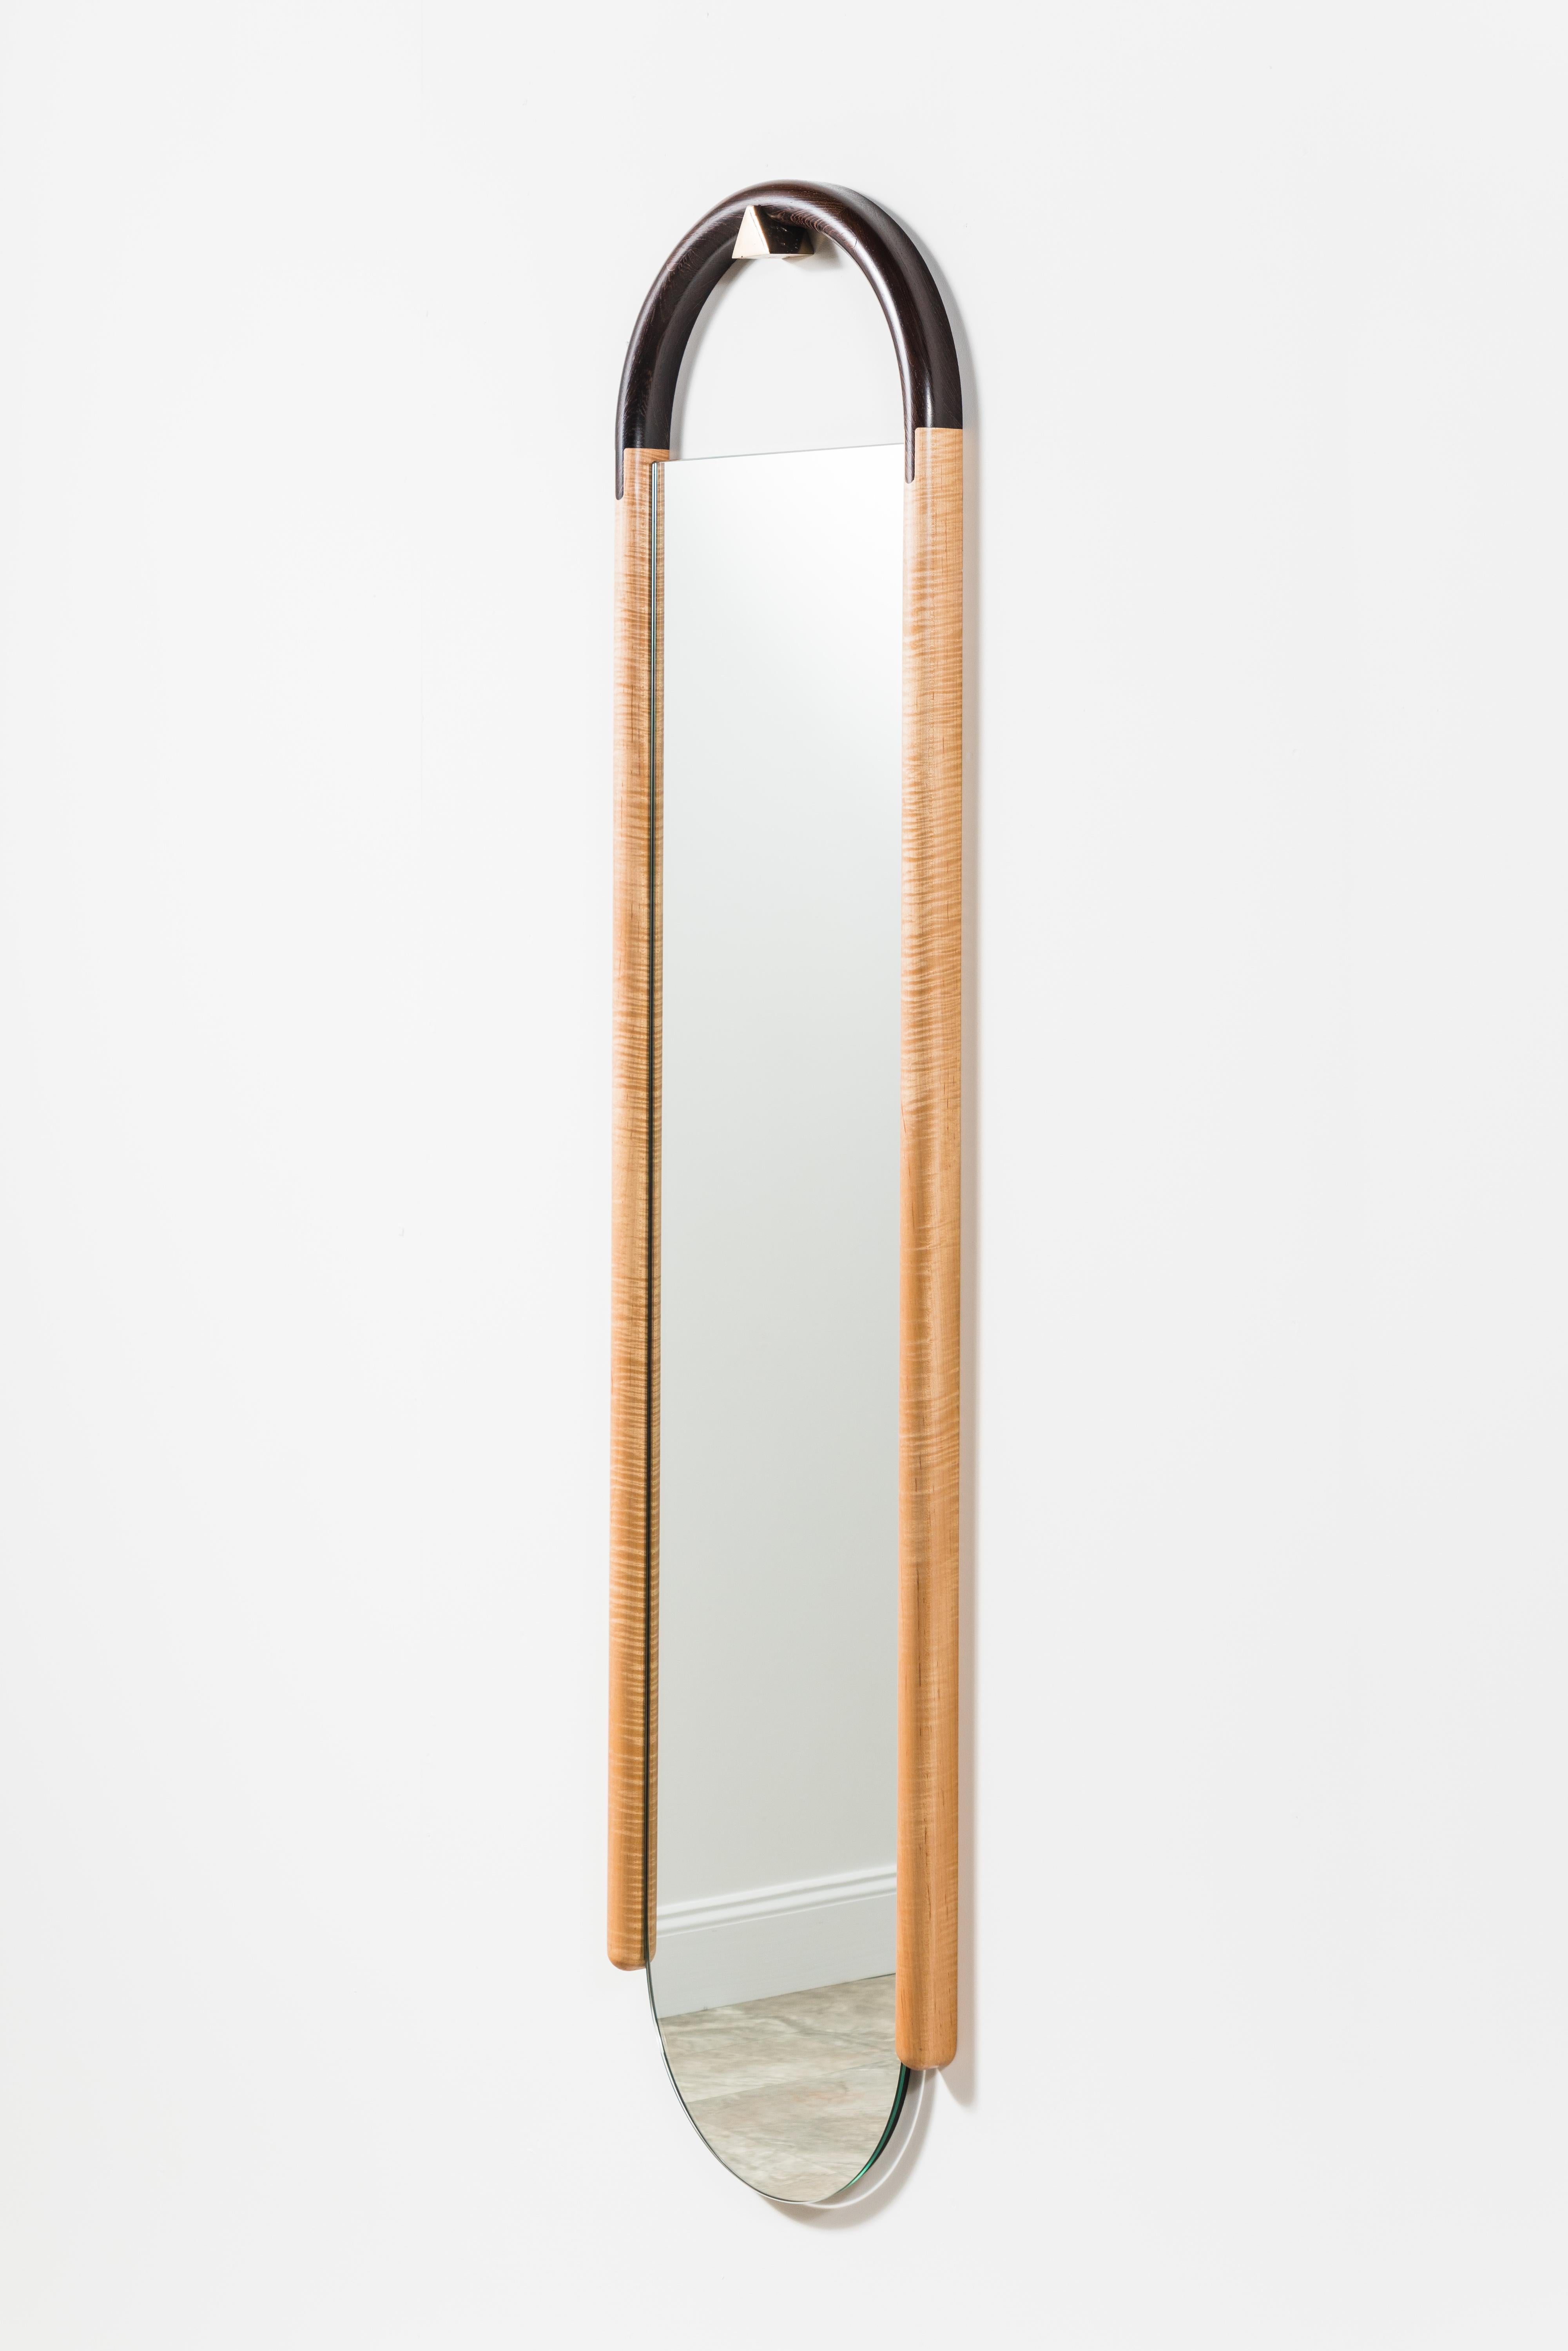 Halo Mirror in Padouk and Curly Maple, Wall Hanging Full Length Mirror 7